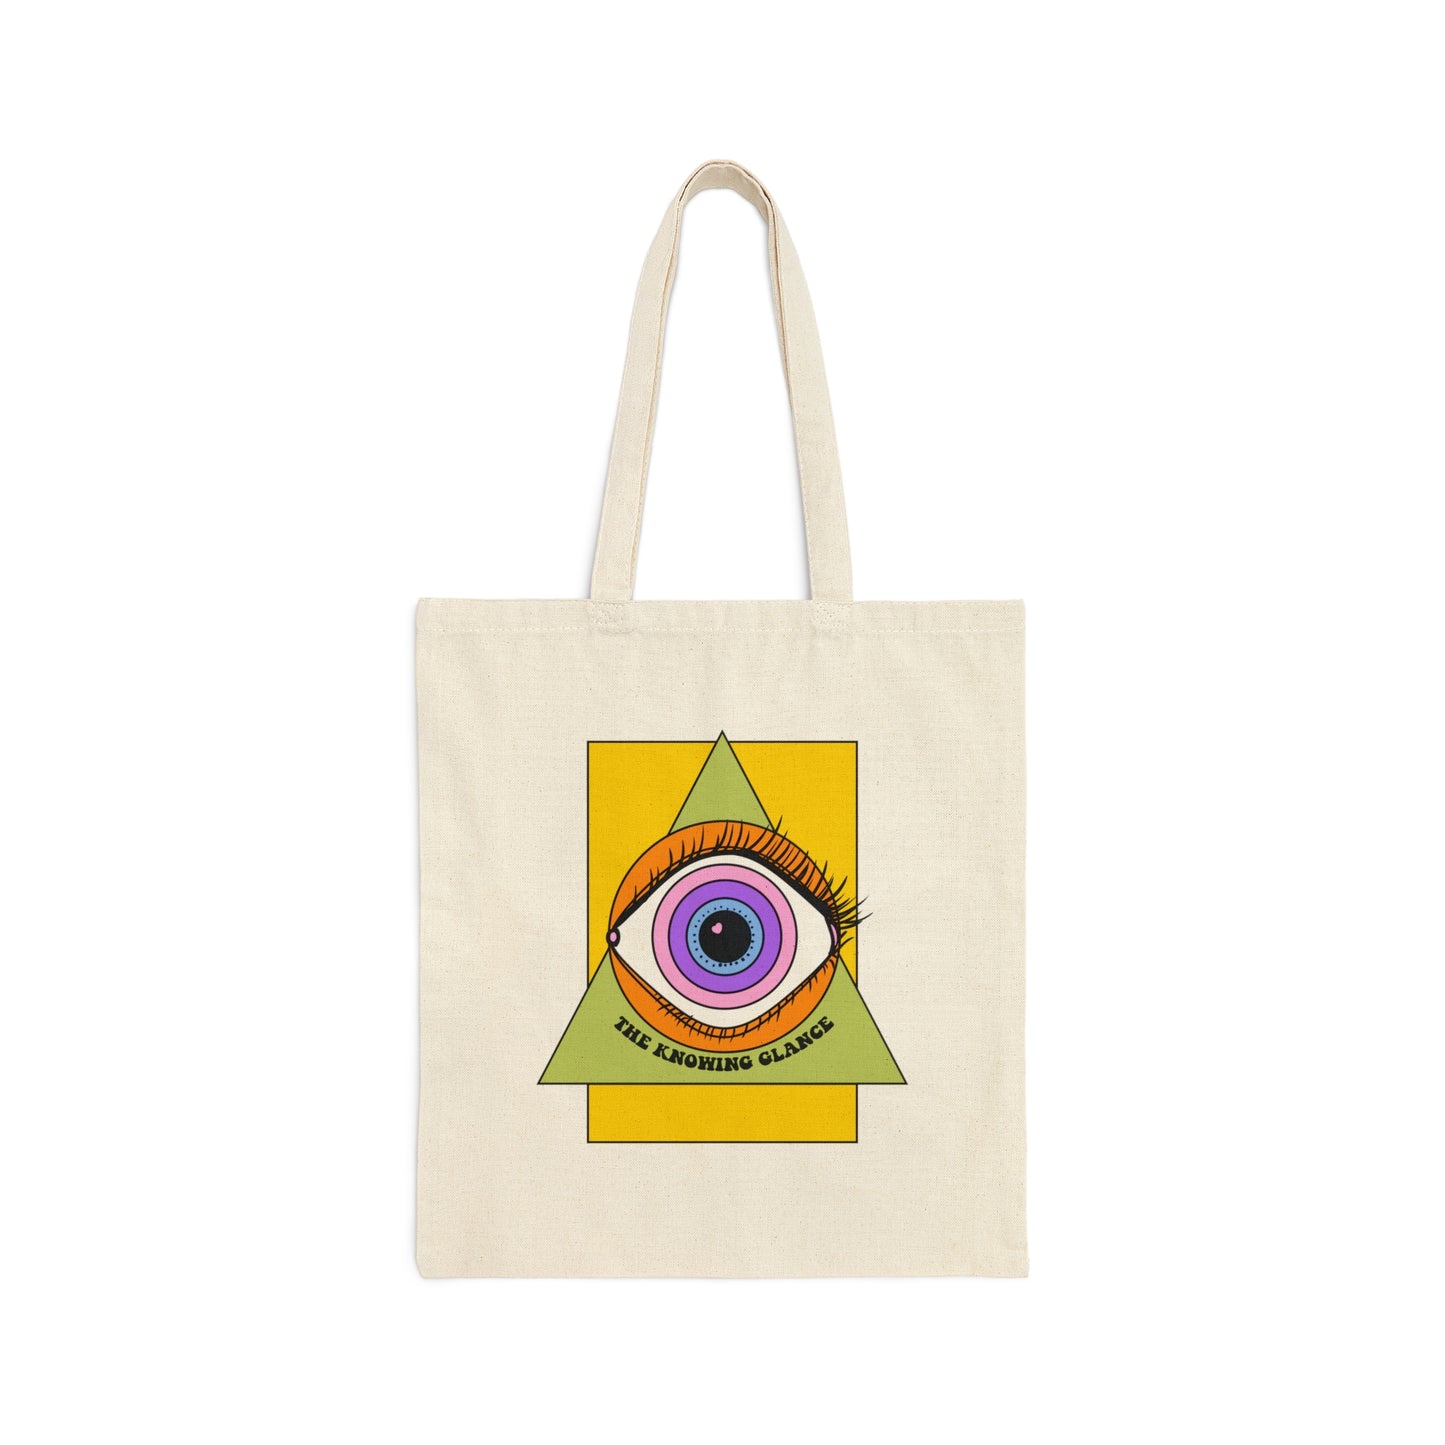 The Knowing Glance - Tote Bag